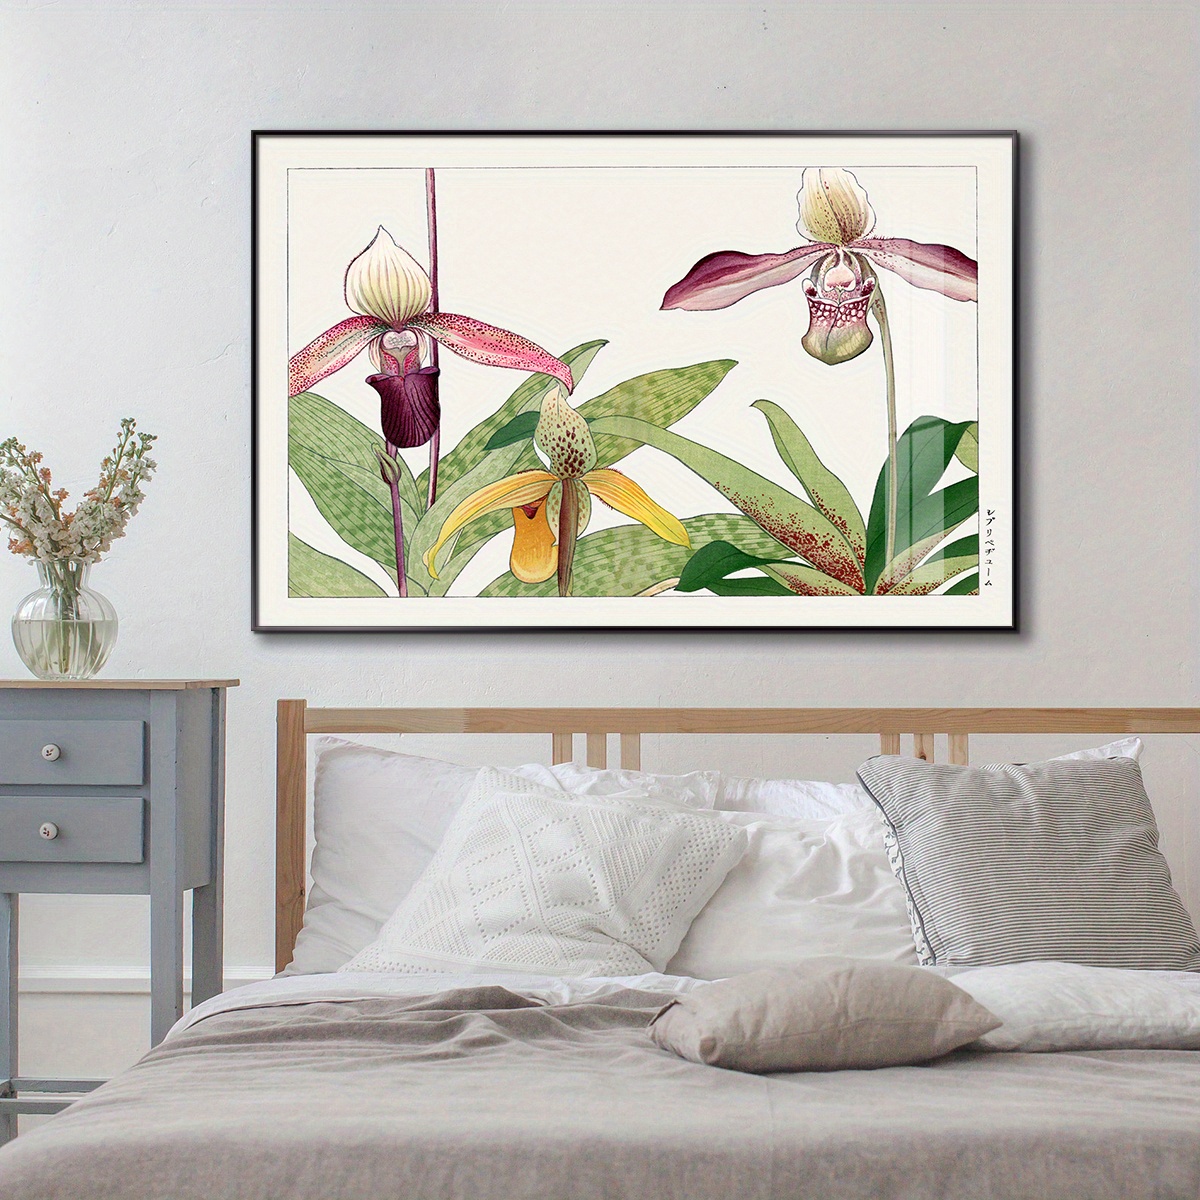 1pc botanical orchids metal framed canvas painting modern minimalist floral wall art waterproof wooden back home office hotel cafe ktv bar wall decor artistic room decor large size decorative picture